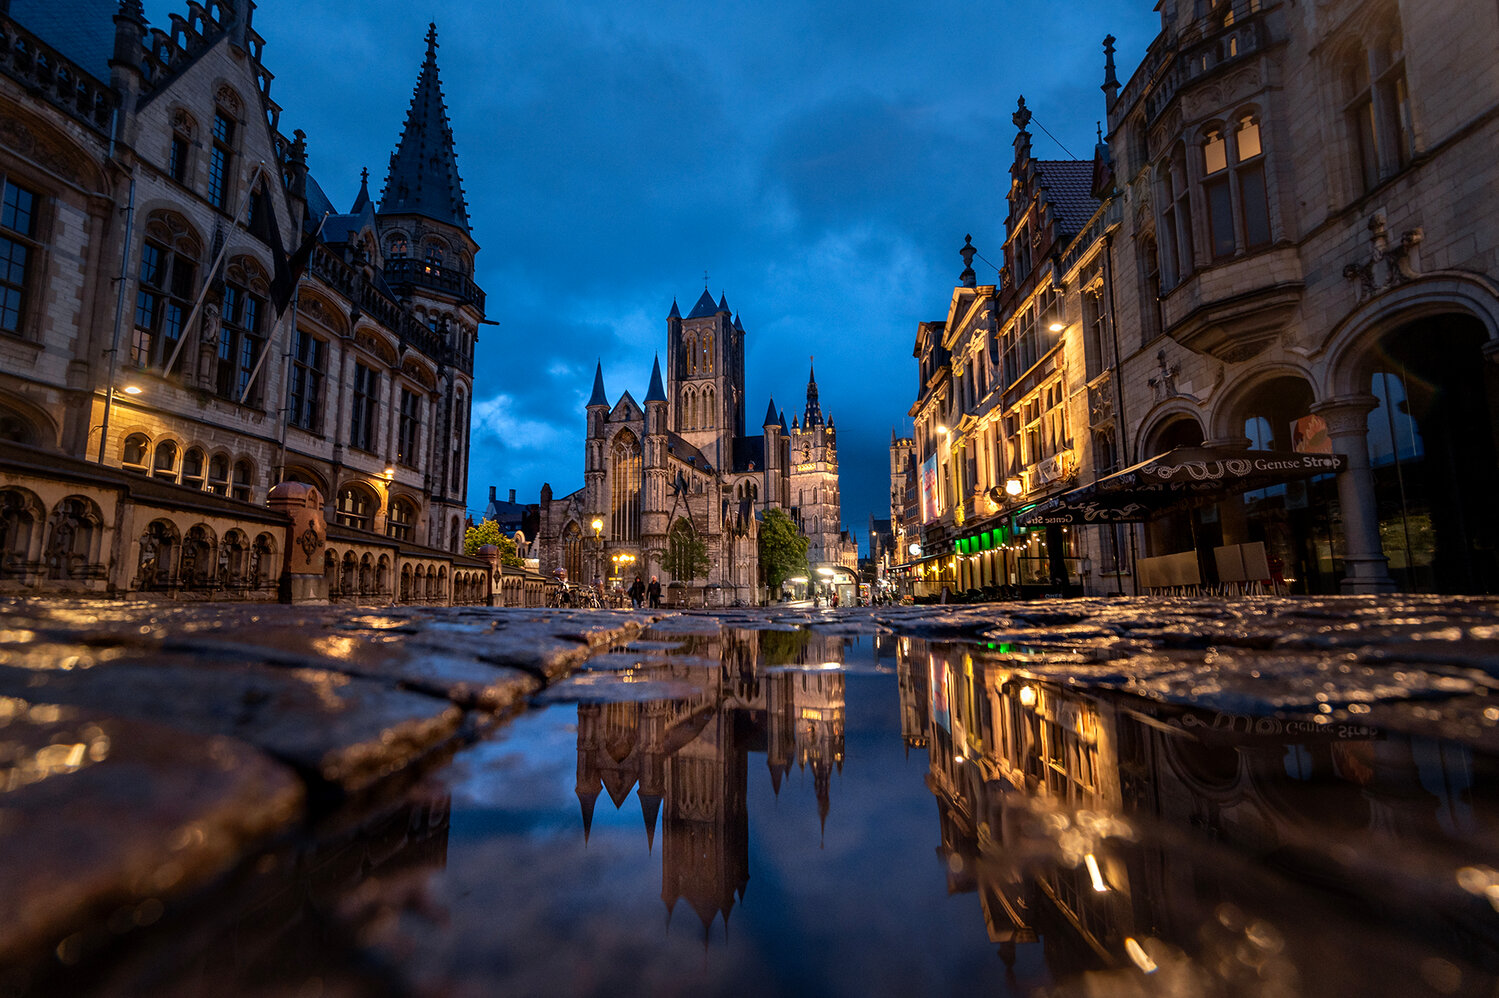 Ghent, Belgium is home to beautiful historic buildings and churches. (Photo/International Mission Board)